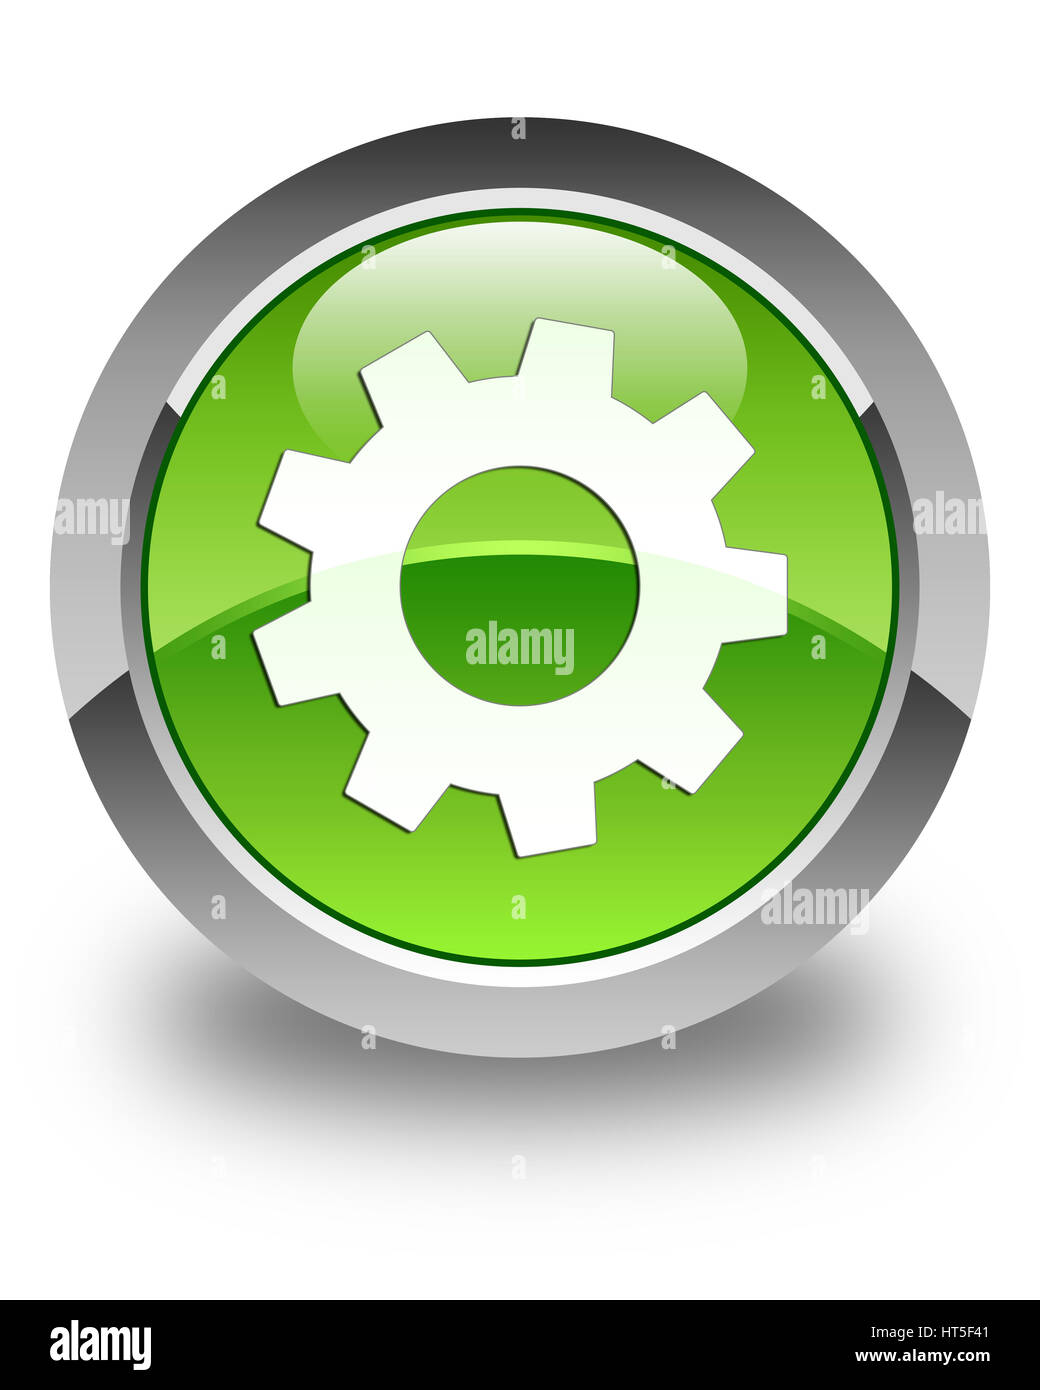 Process icon isolated on glossy green round button abstract illustration Stock Photo